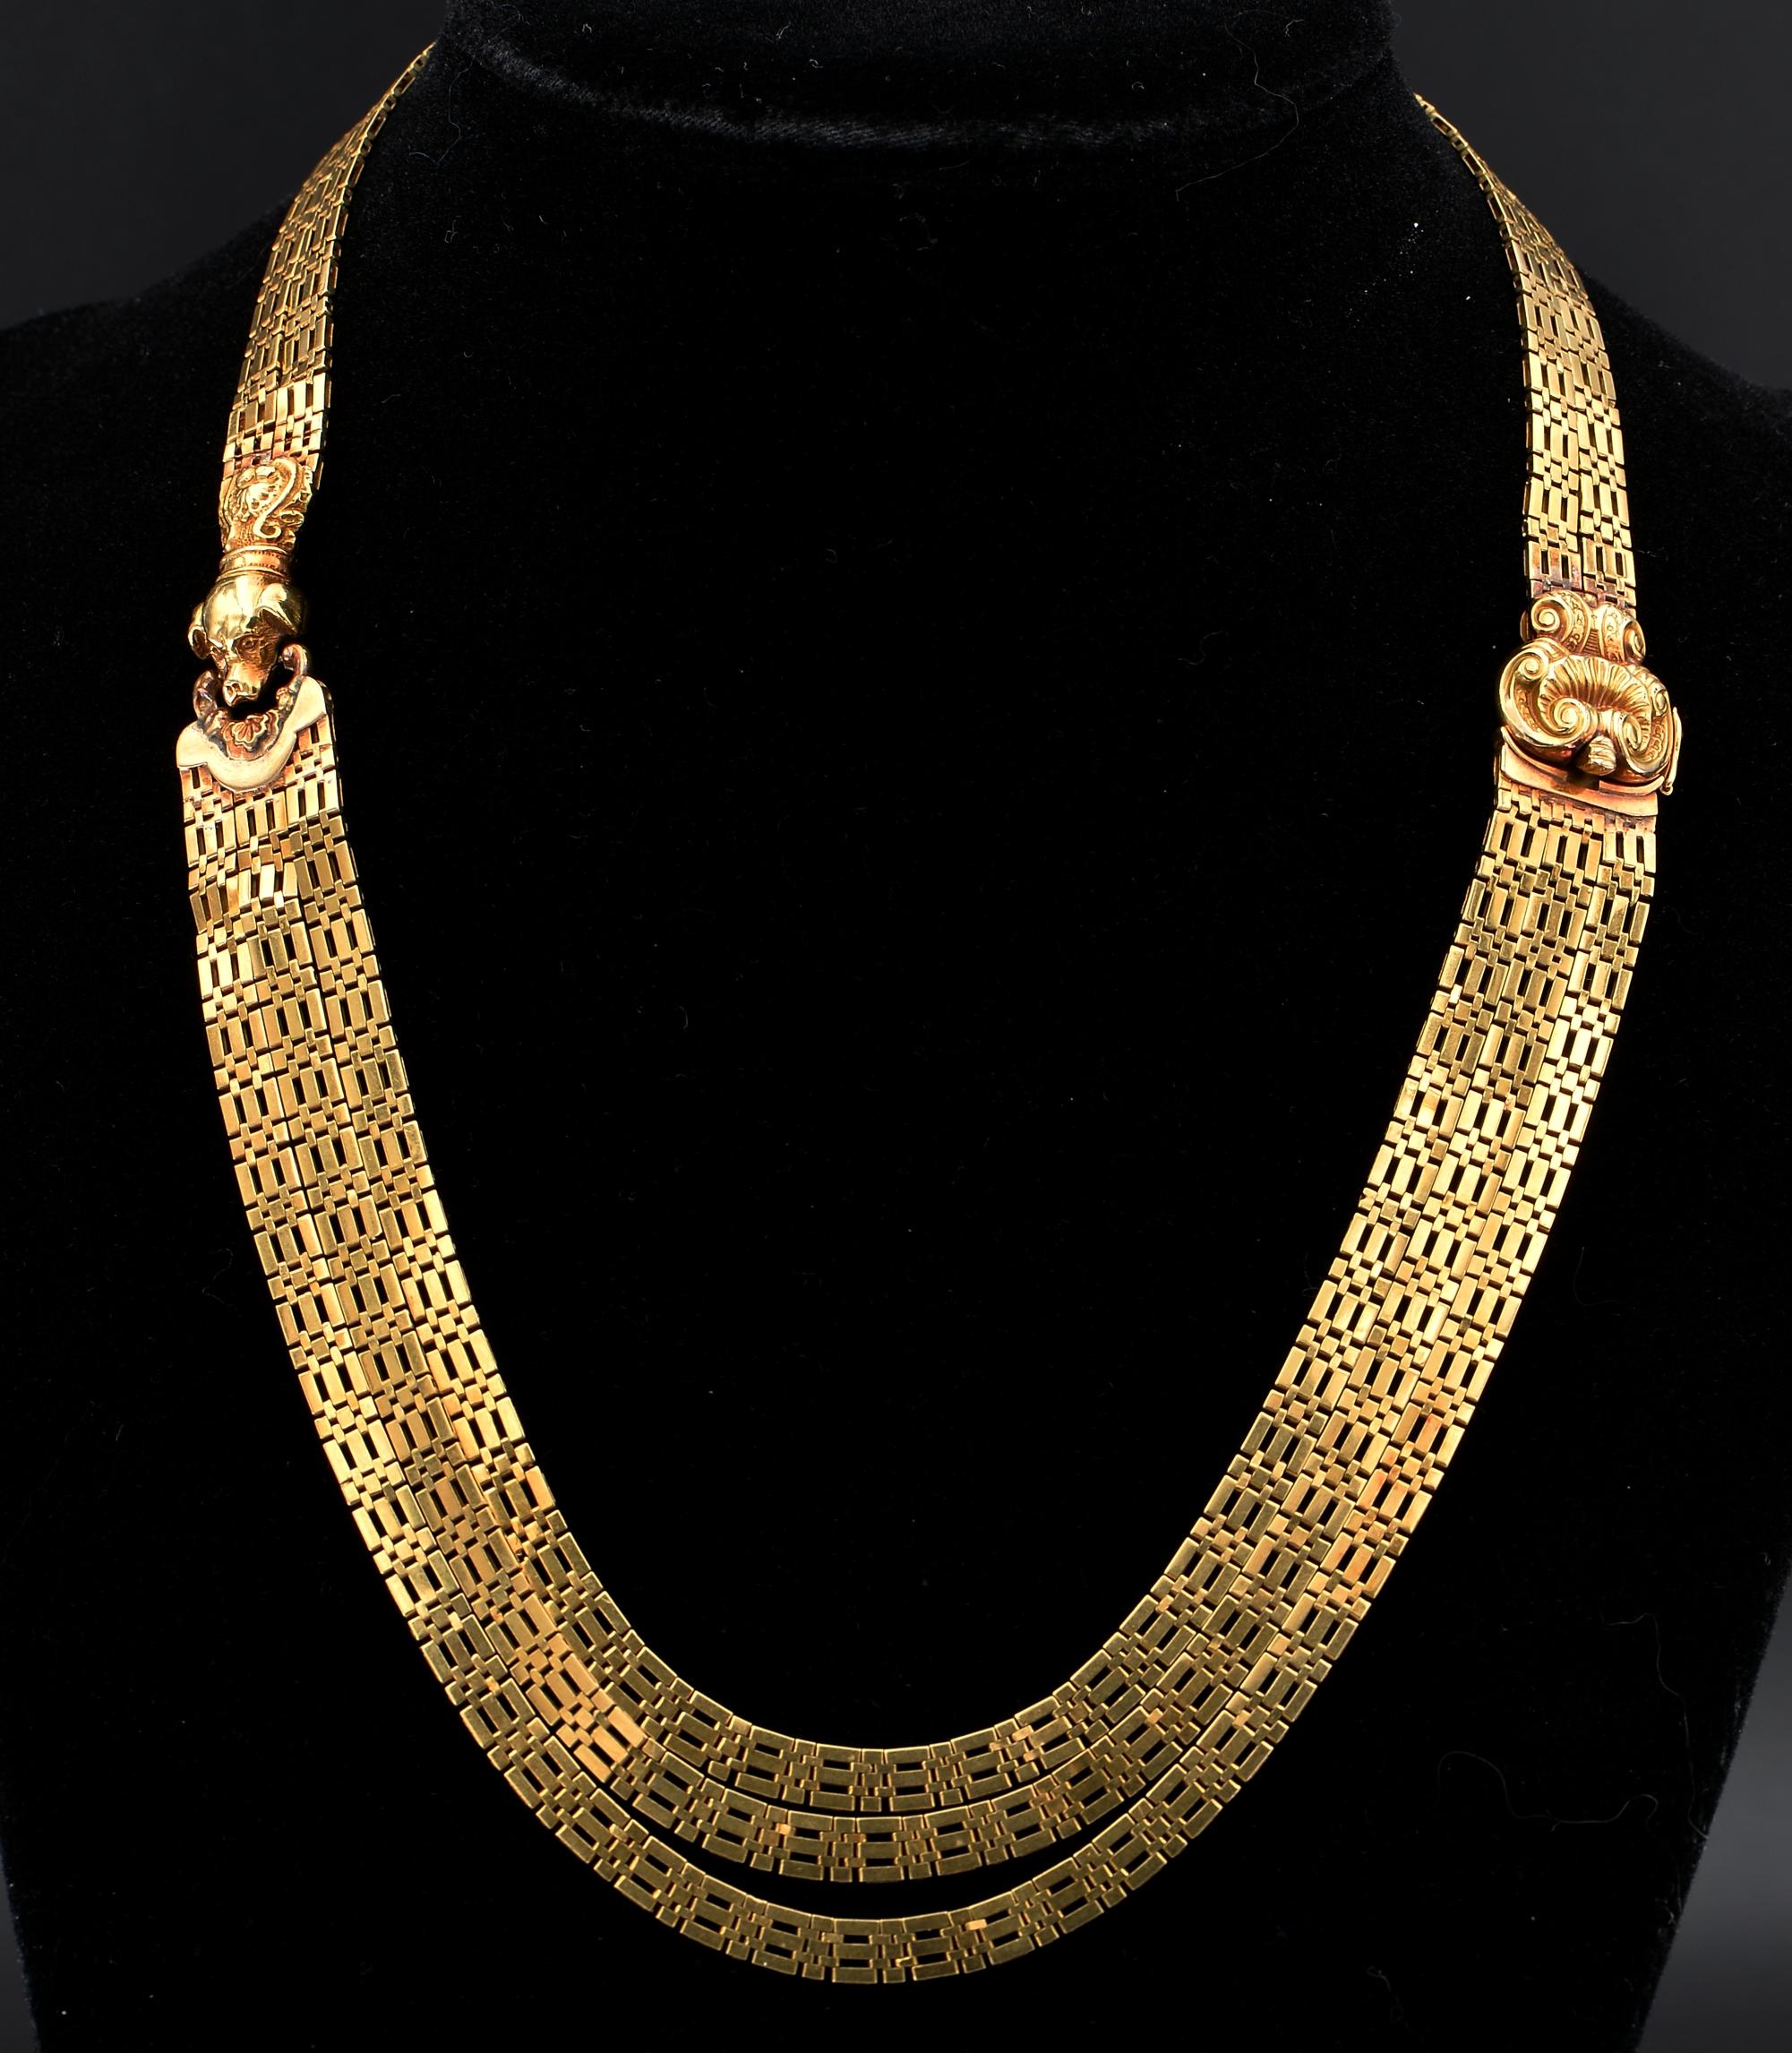 Rare Find
An extra – ordinary antique 1820 ca gold collar necklace, hand crafted during the time of solid 18 kt gold – tested
Rare design, comprising exquisite flat shaped links of spectacular Greek key like design – two chains at the back side,